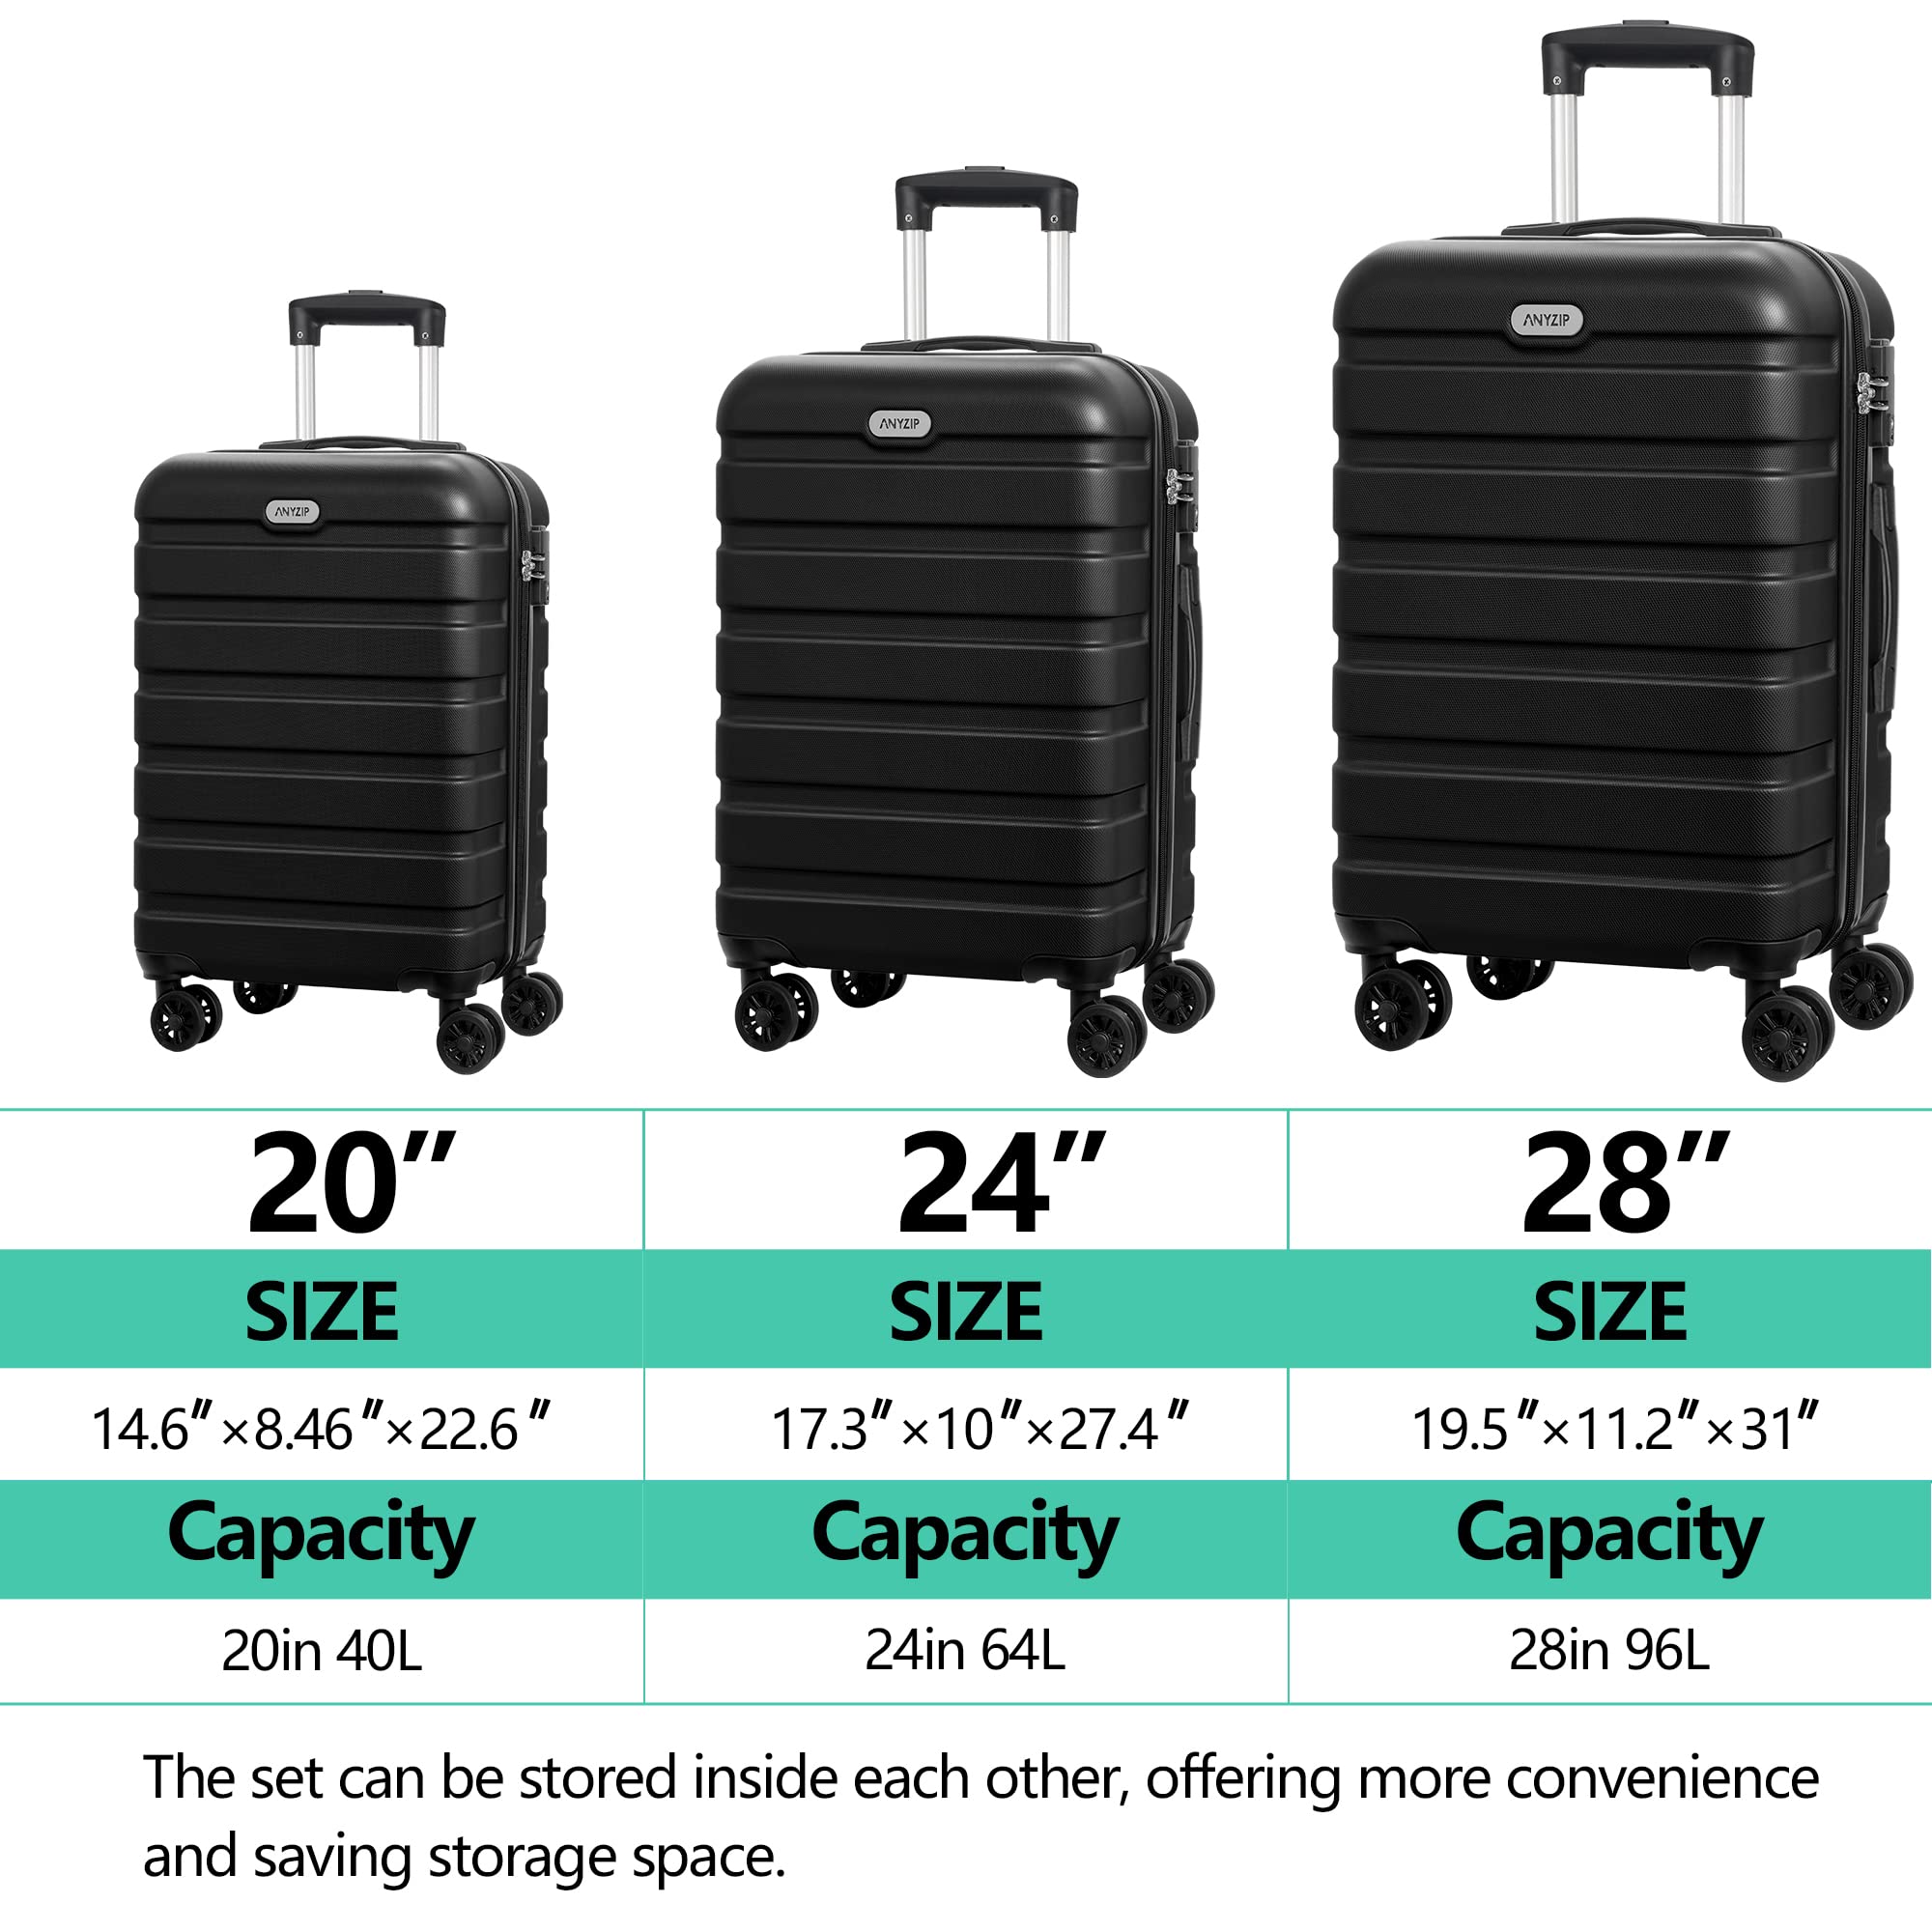 AnyZip Luggage Sets 3 Piece PC ABS Hardside Lightweight Suitcase with 4 Universal Wheels TSA Lock Carry On 20 24 28 Inch Black